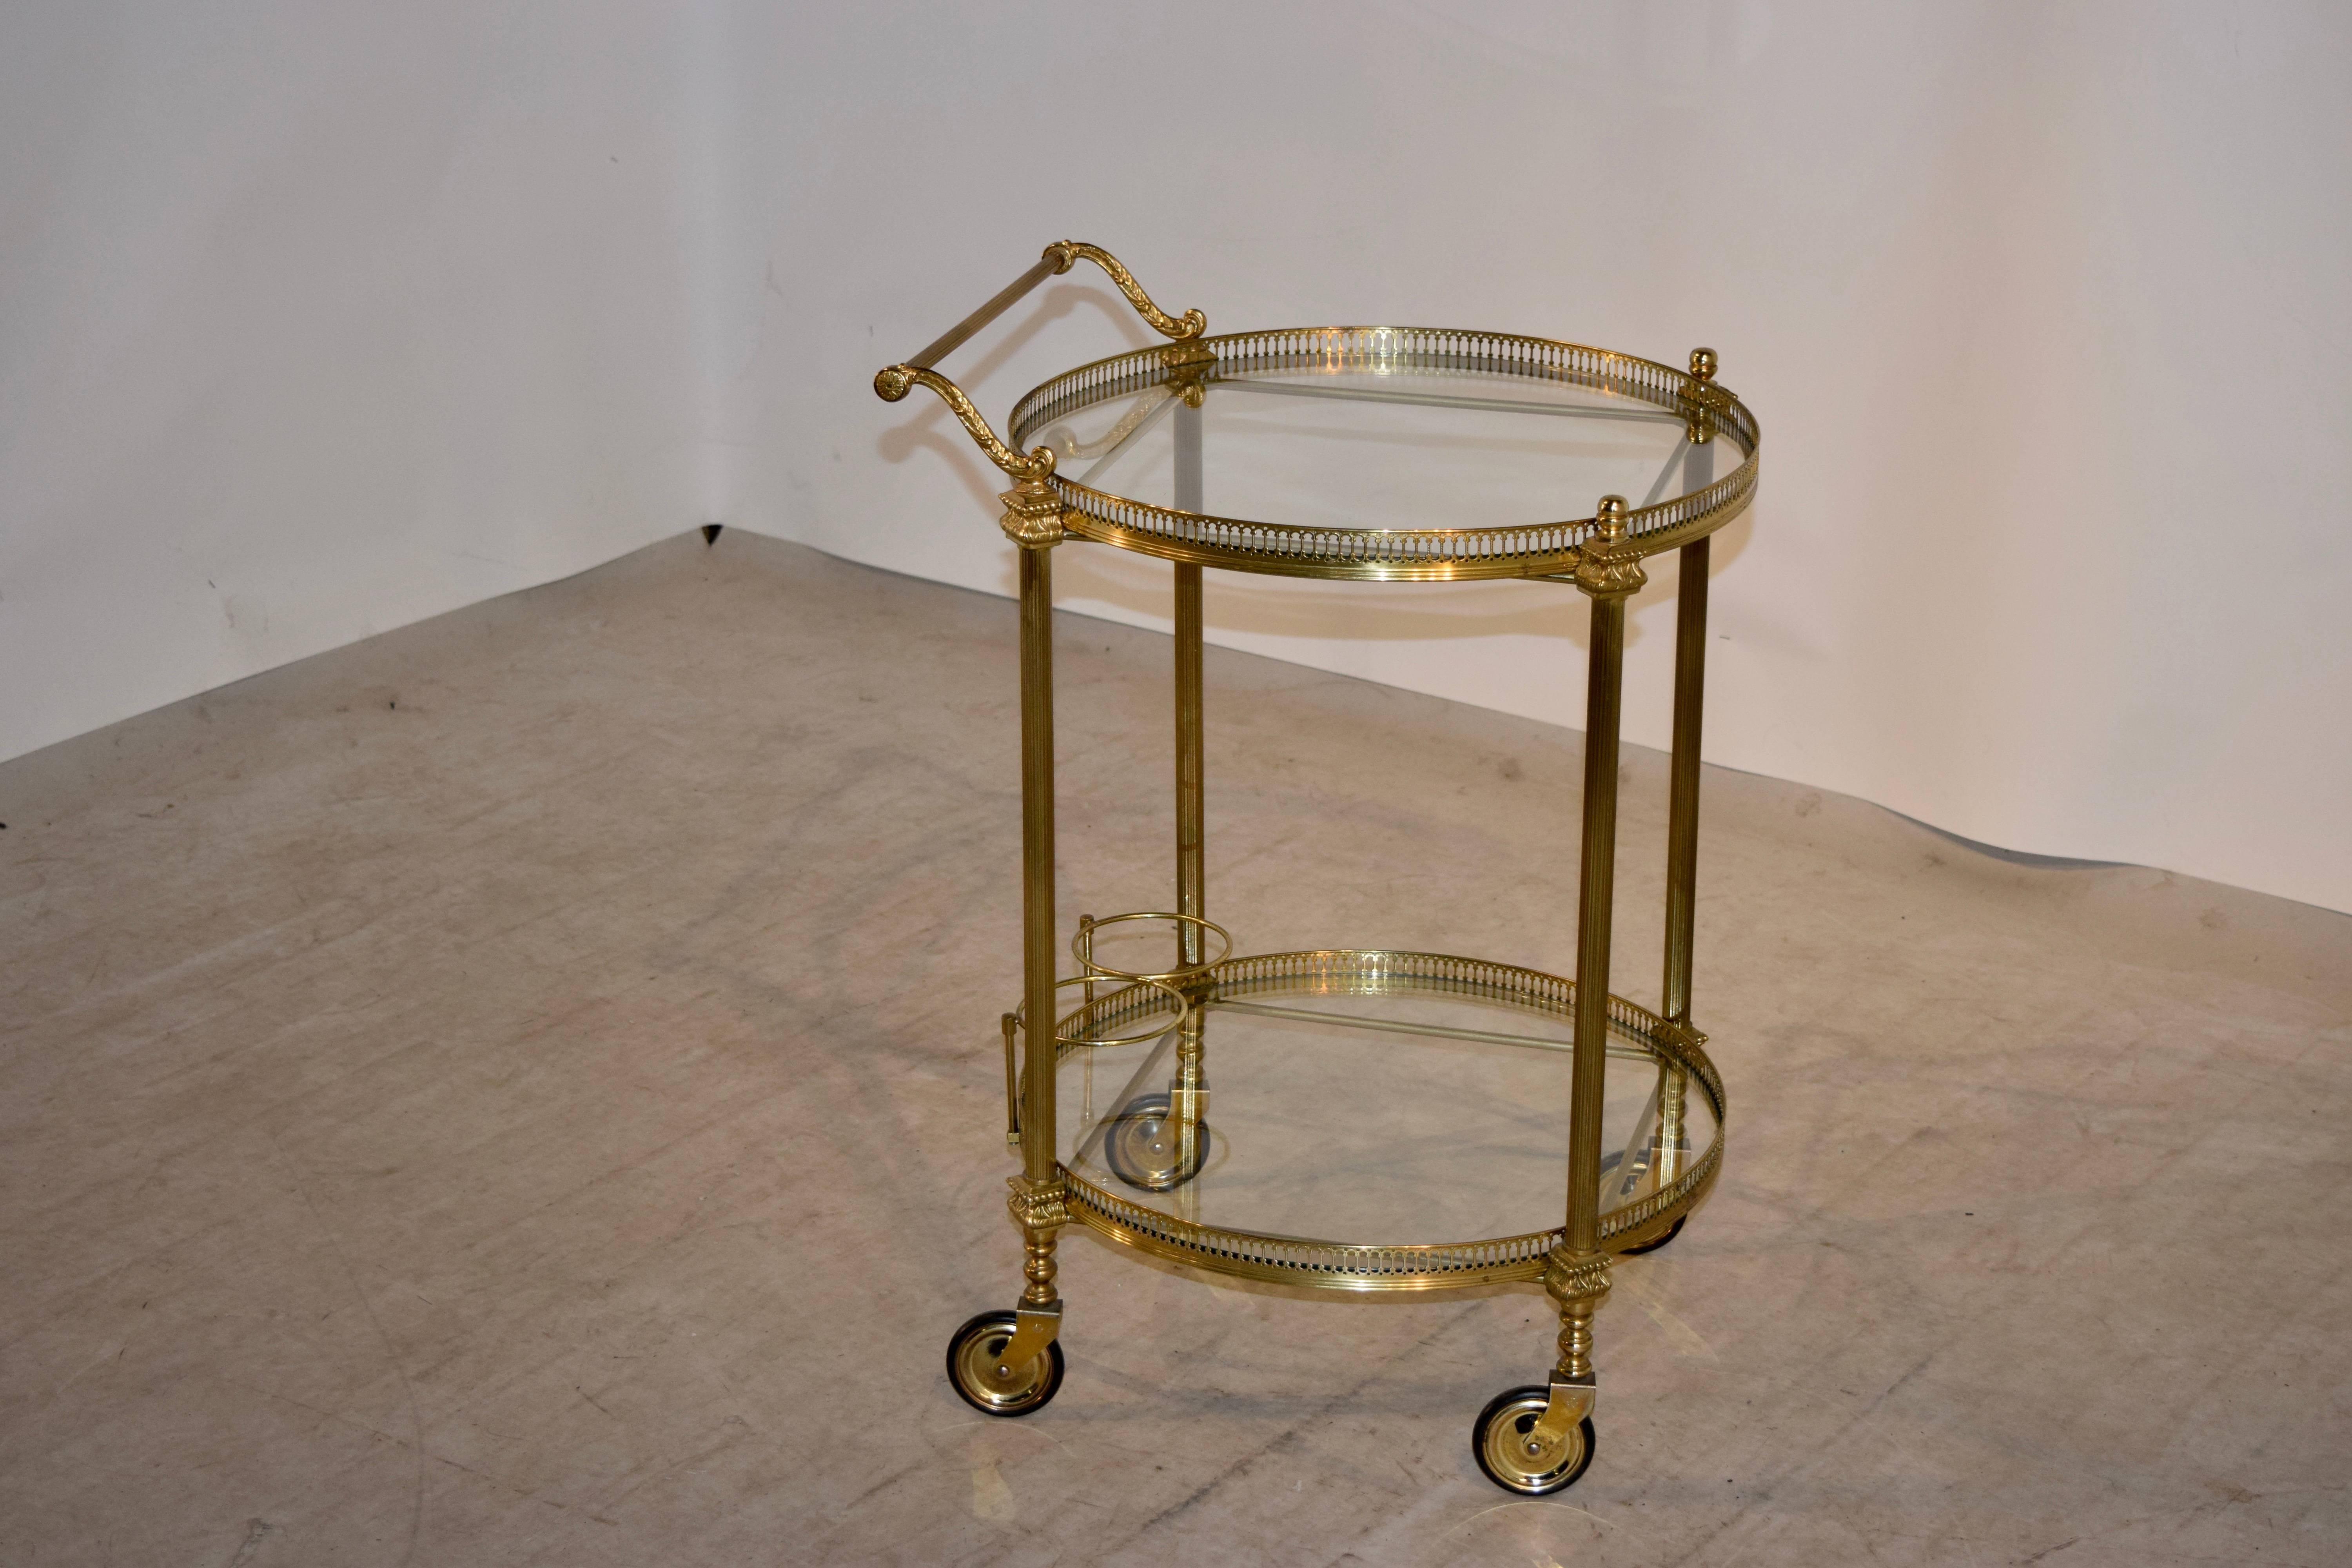 English drinks cart made from brass with glass shelves, circa 1920. The shelves have pierced galleries around them and are connected by fluted columns. It retains its original casters.